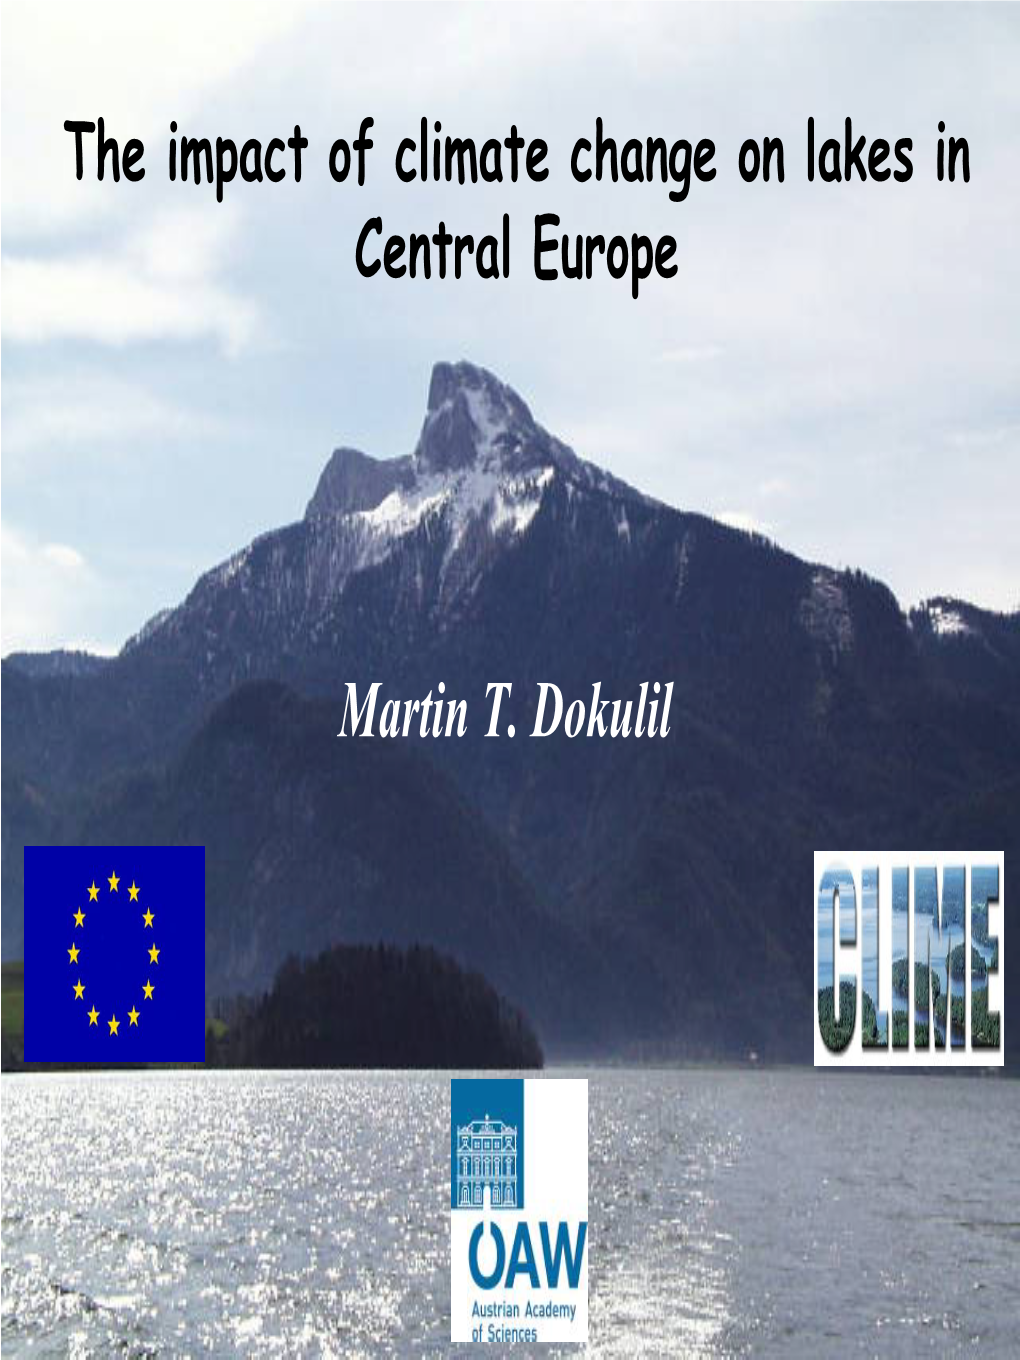 The Impact of Climate Change on Lakes in Central Europe